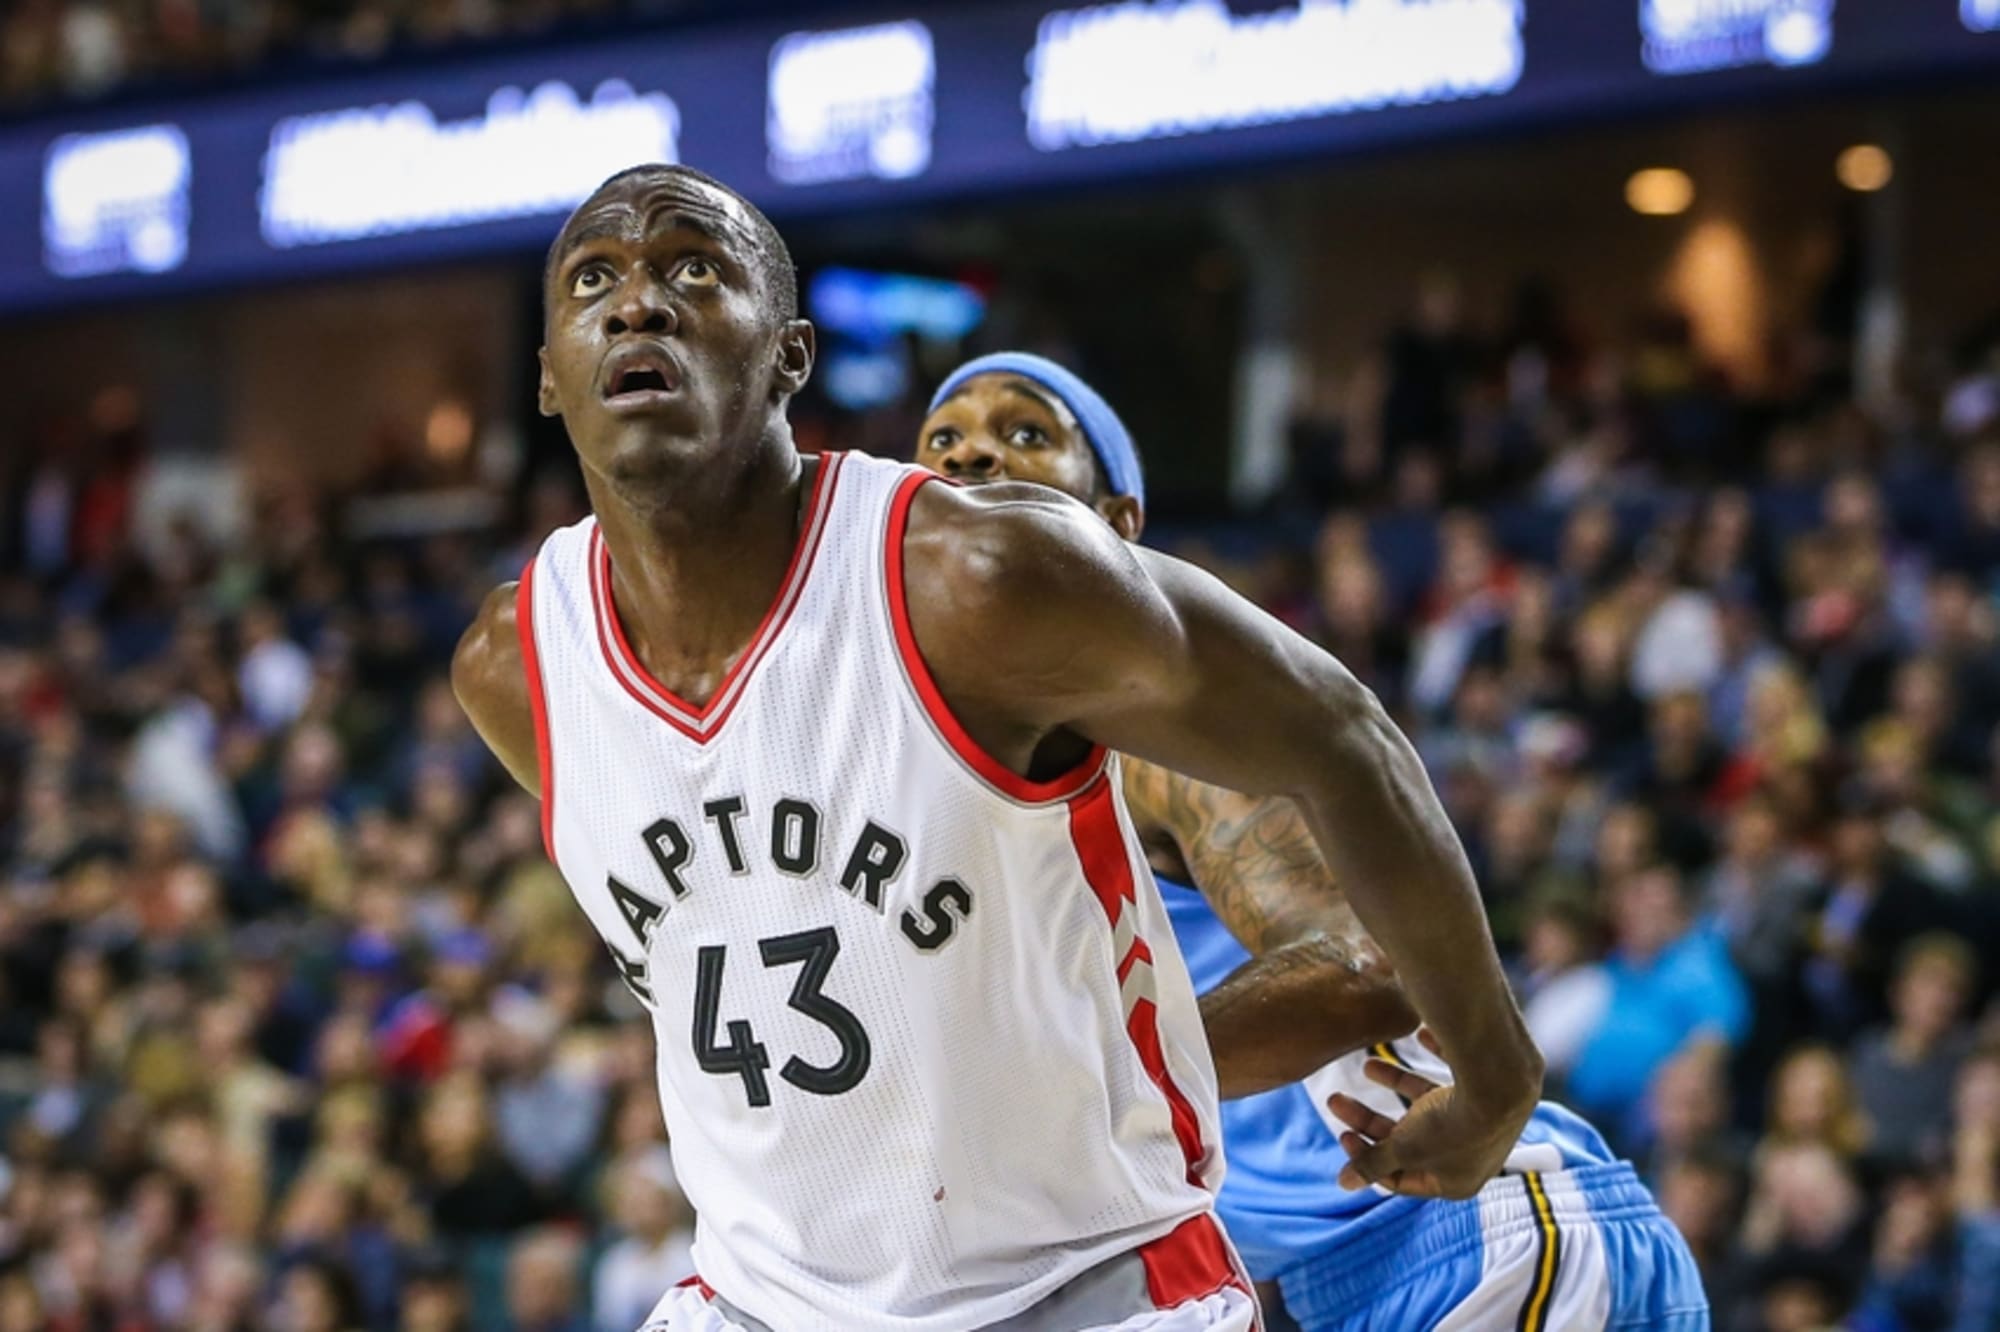 pascal siakam on X: Don't watch the clock; do what it does. Keep